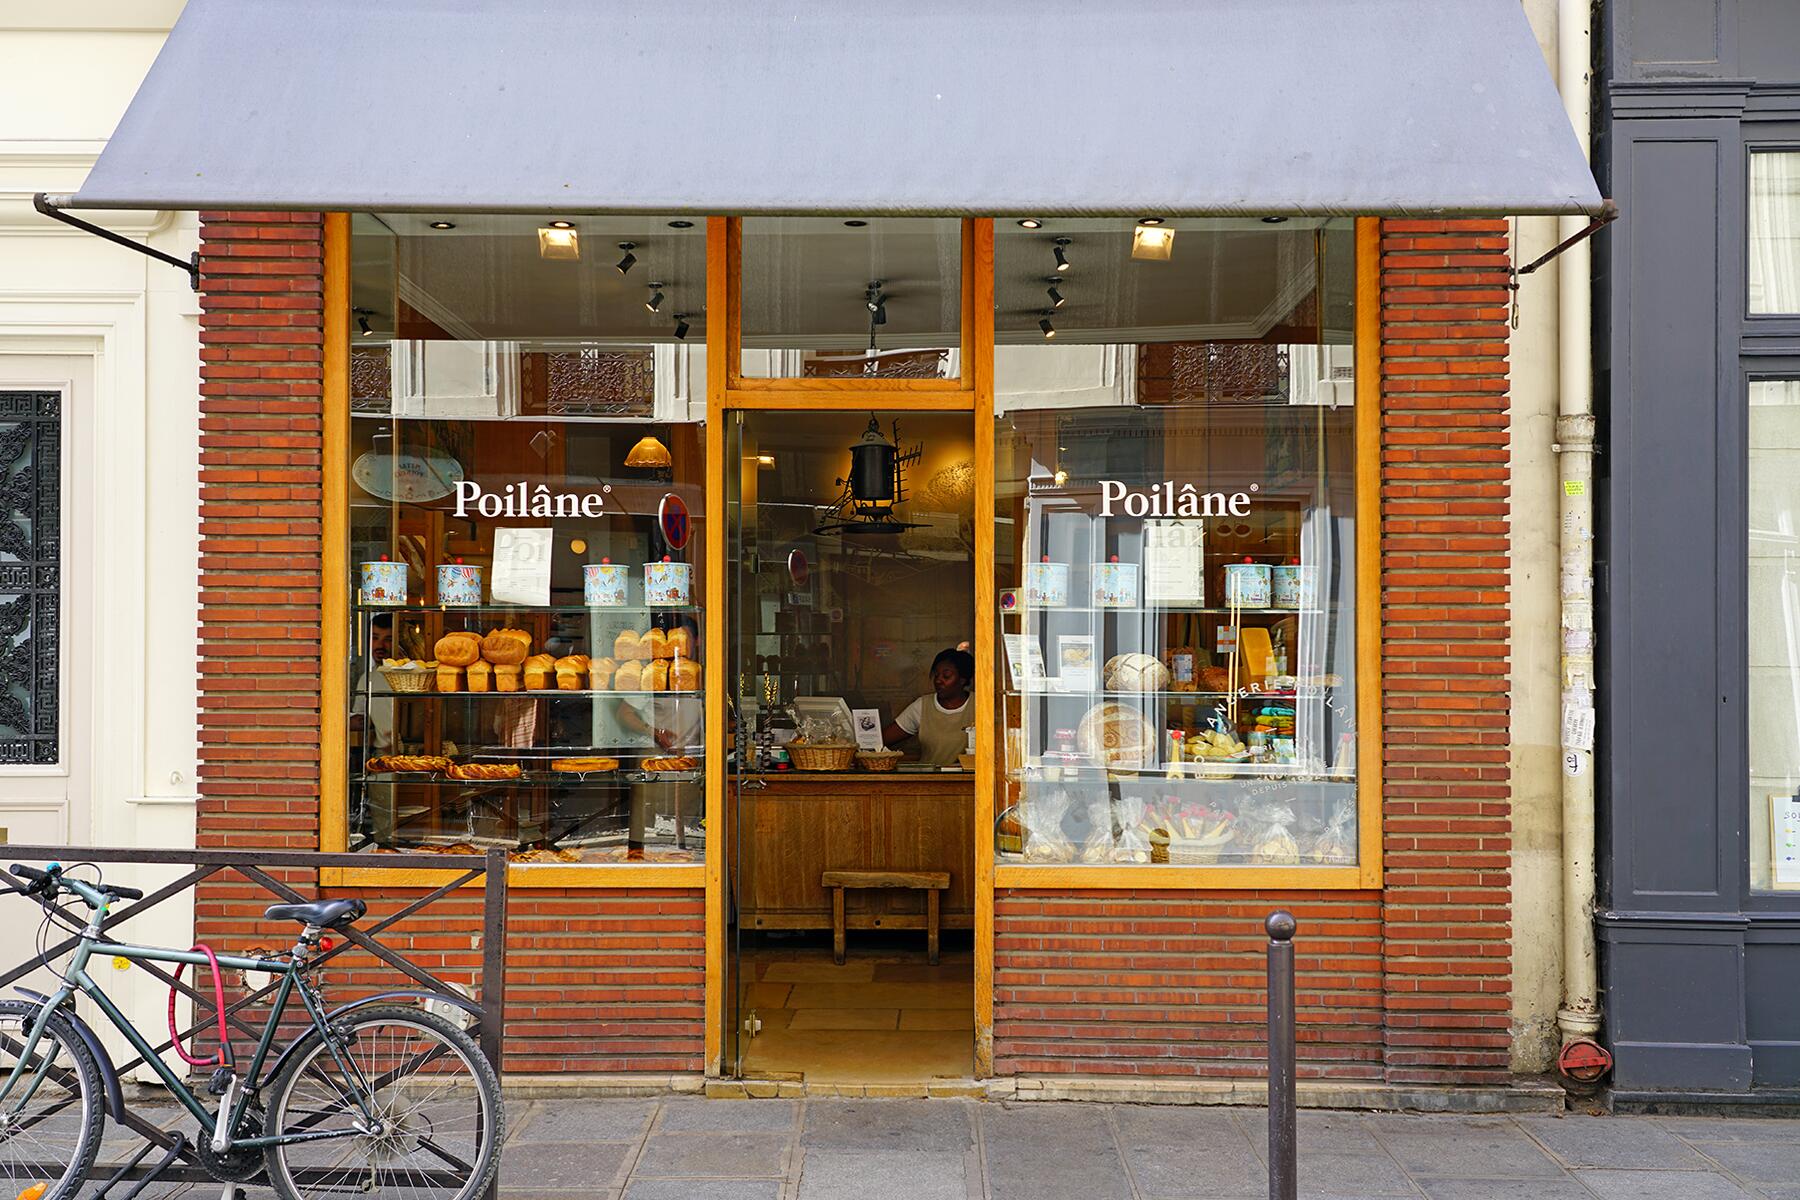 <a href='https://www.fodors.com/world/europe/france/paris/experiences/news/photos/the-best-bakeries-and-boulangeries-in-paris#'>From &quot;The 13 Best Bakeries and Boulangeries in Paris: Boulangerie Poilâne&quot;</a>